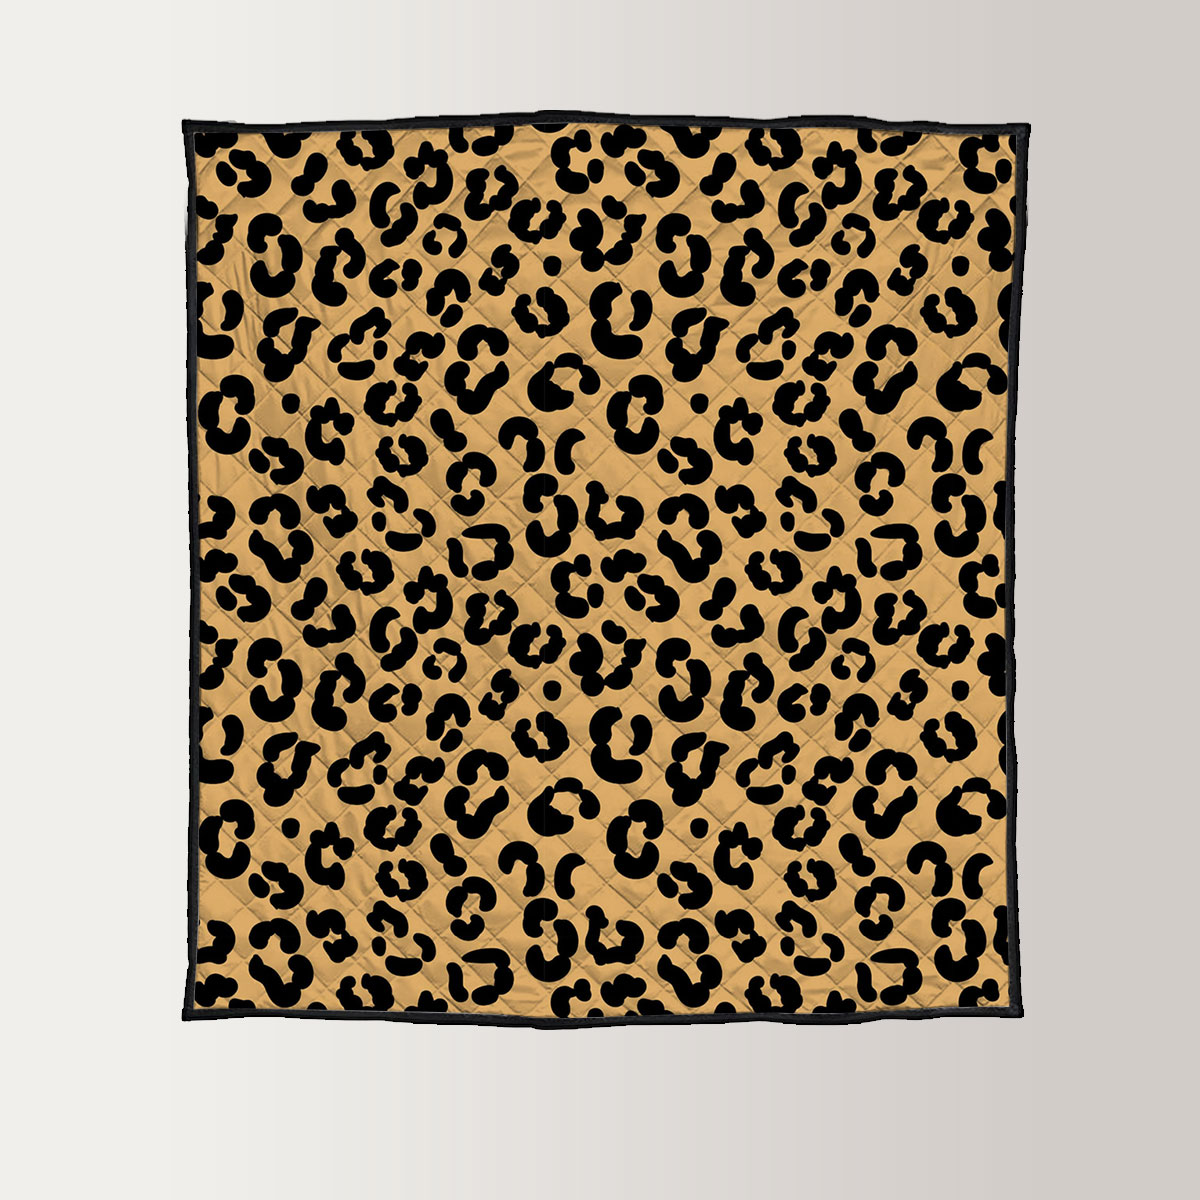 Panther Skin Quilt